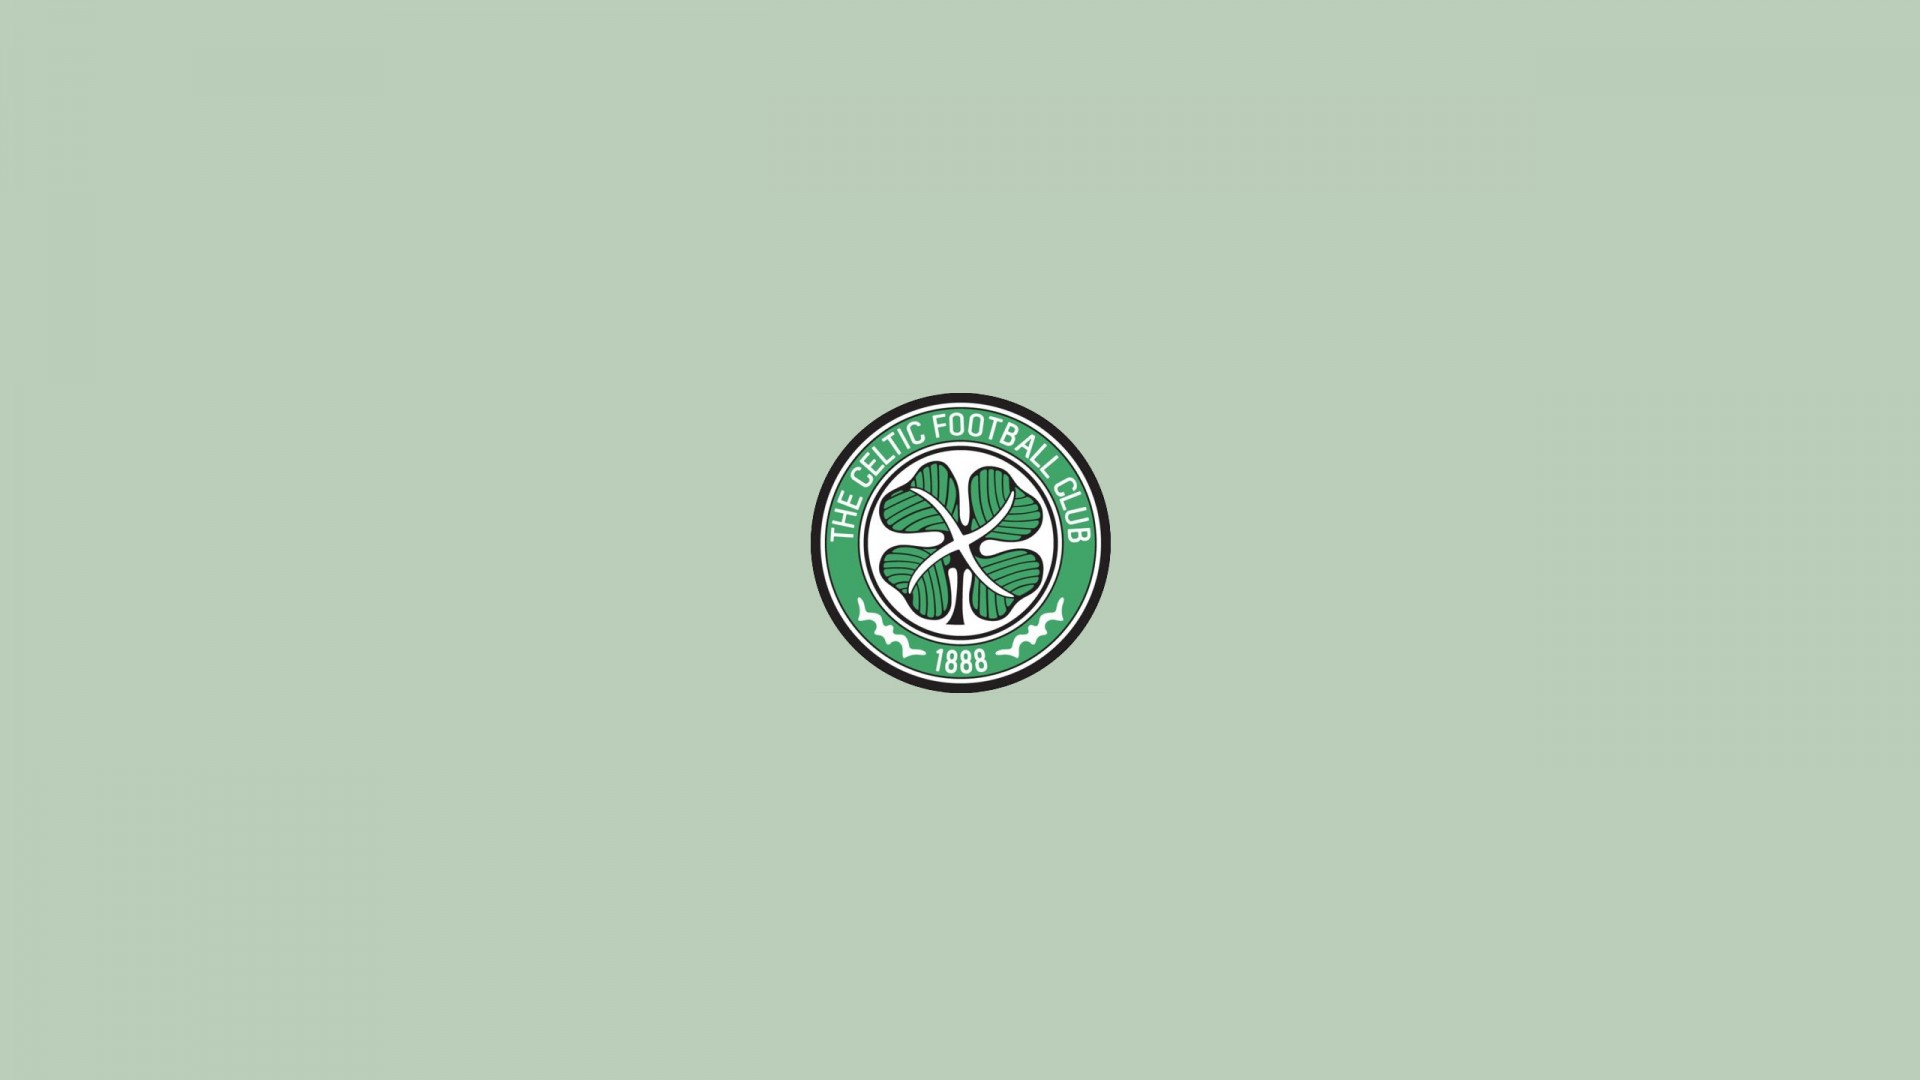 Soccer Clubs Football Glasgow Celtic Glasgow Simple Background Green Background 1920x1080